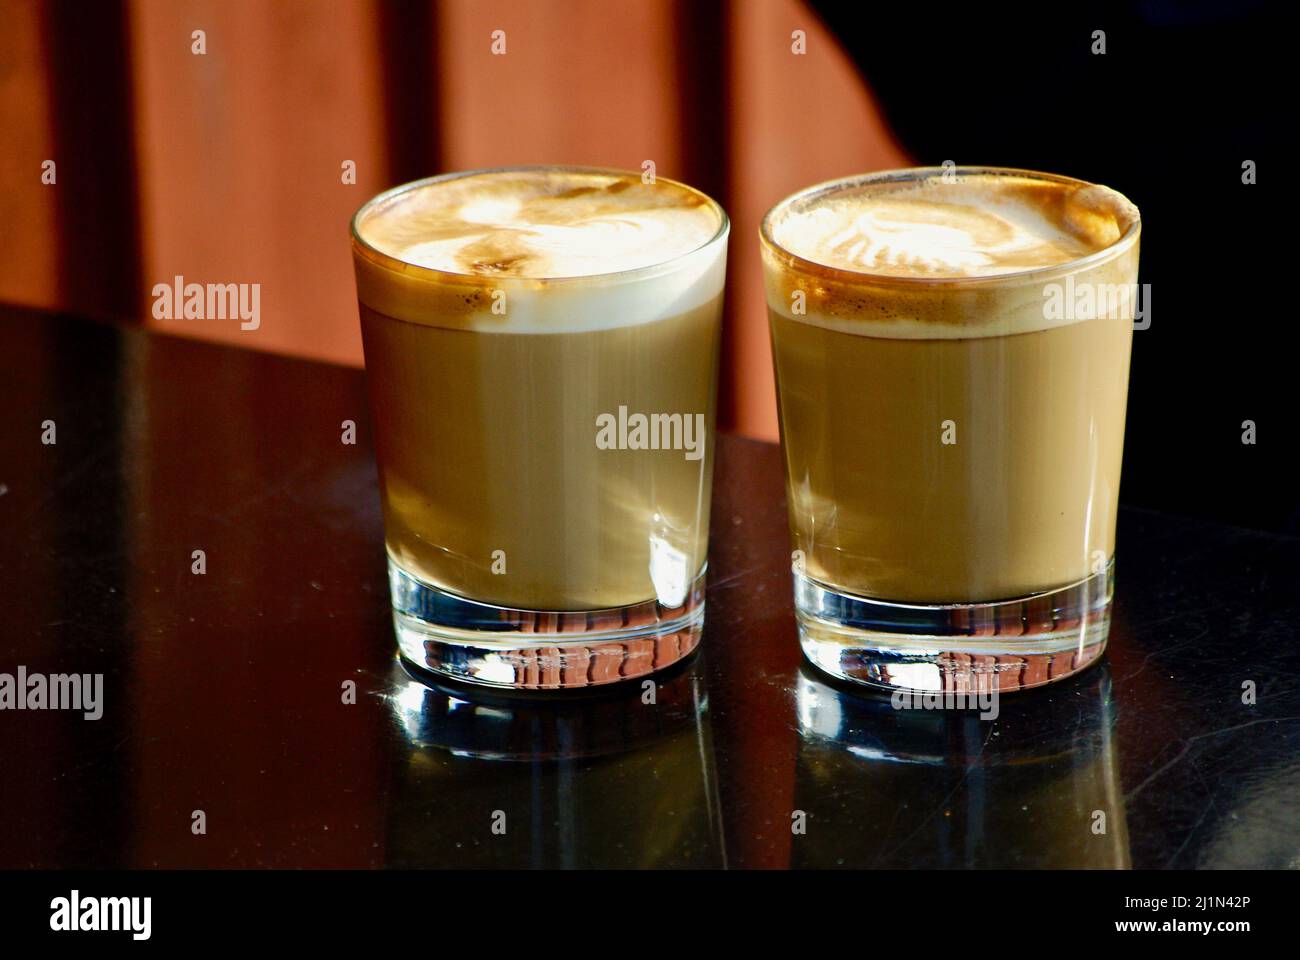 Two glasses of cappuccino in front of a red wooden house wall outdoors in autumn. Stock Photo